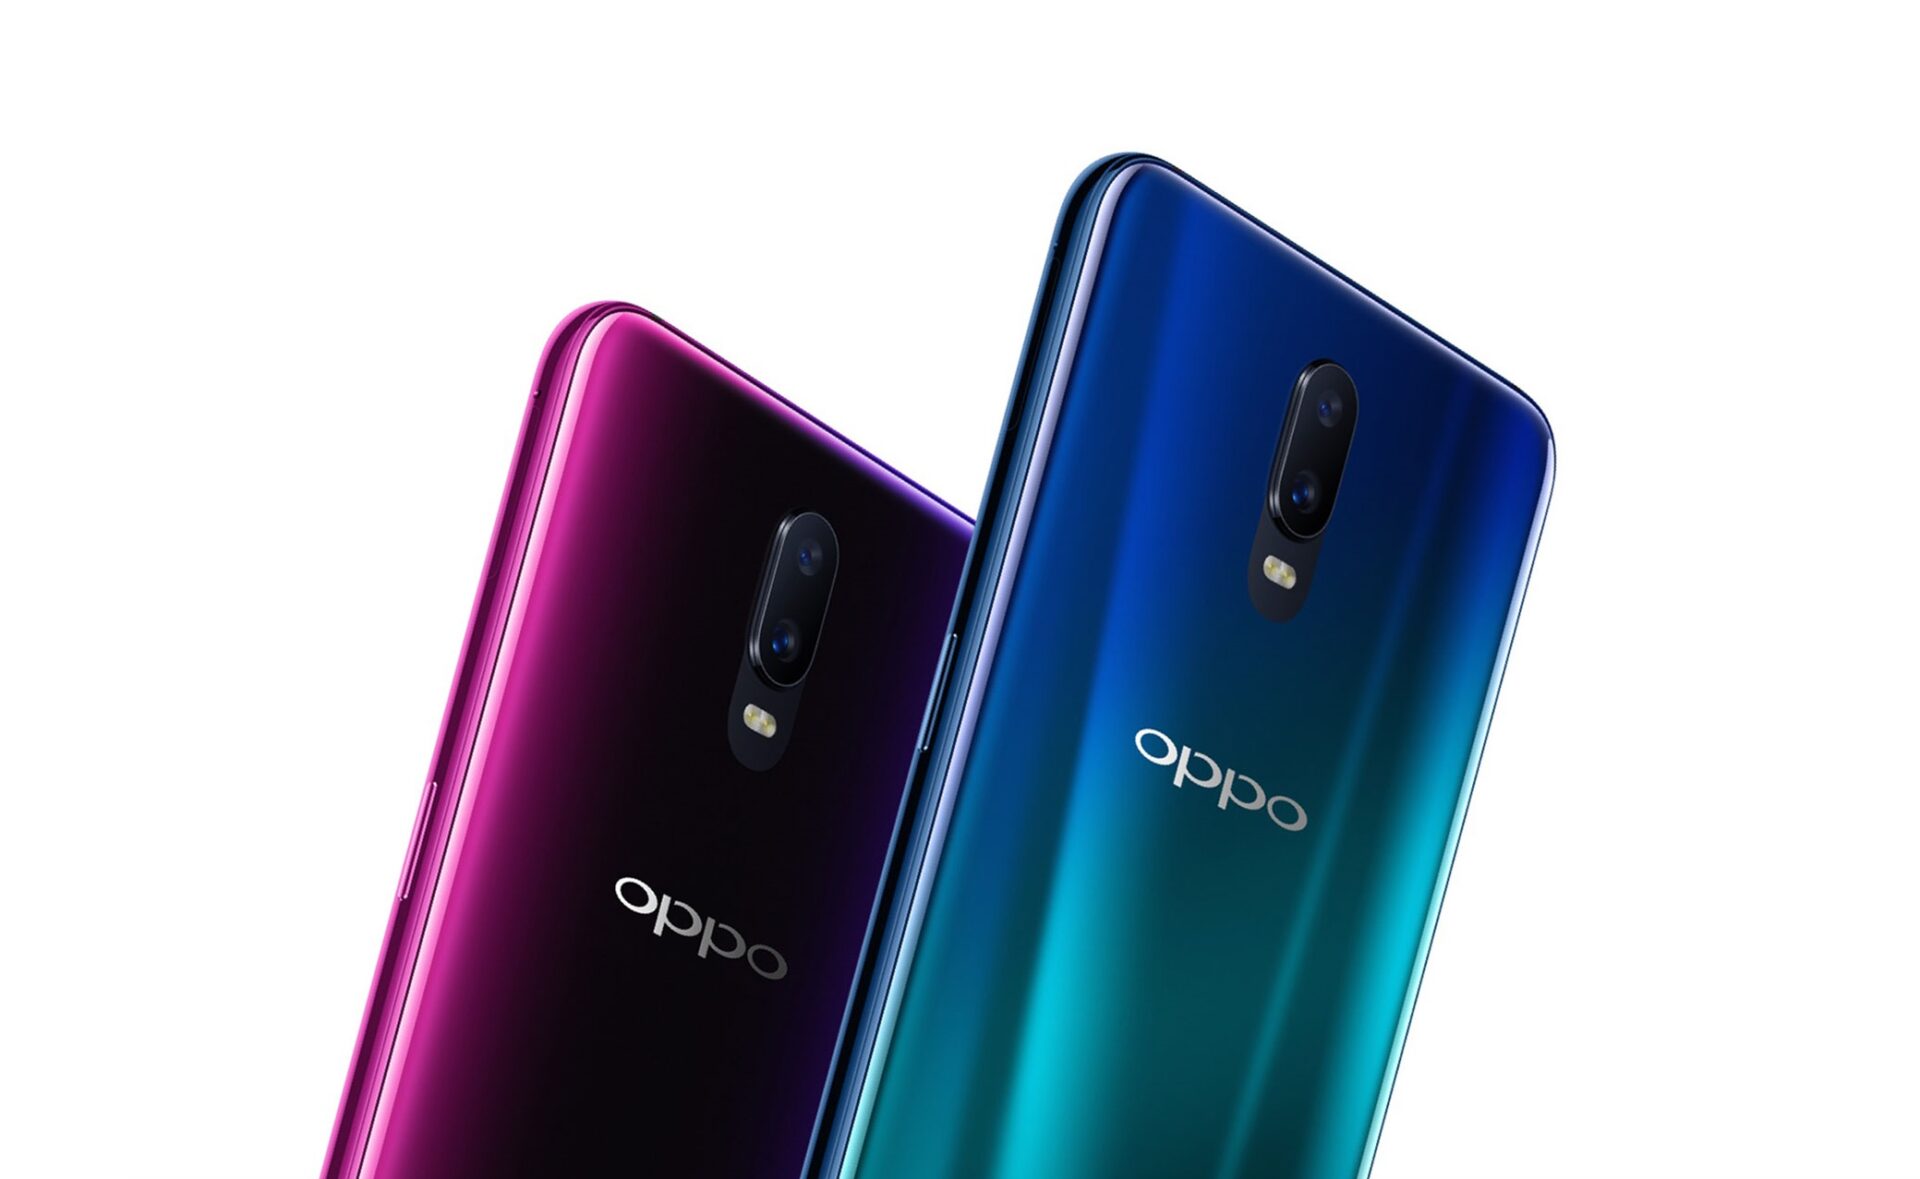 Oppo reveals Oppo R17' price at CNY3,499 ahead of its official launch on August 23